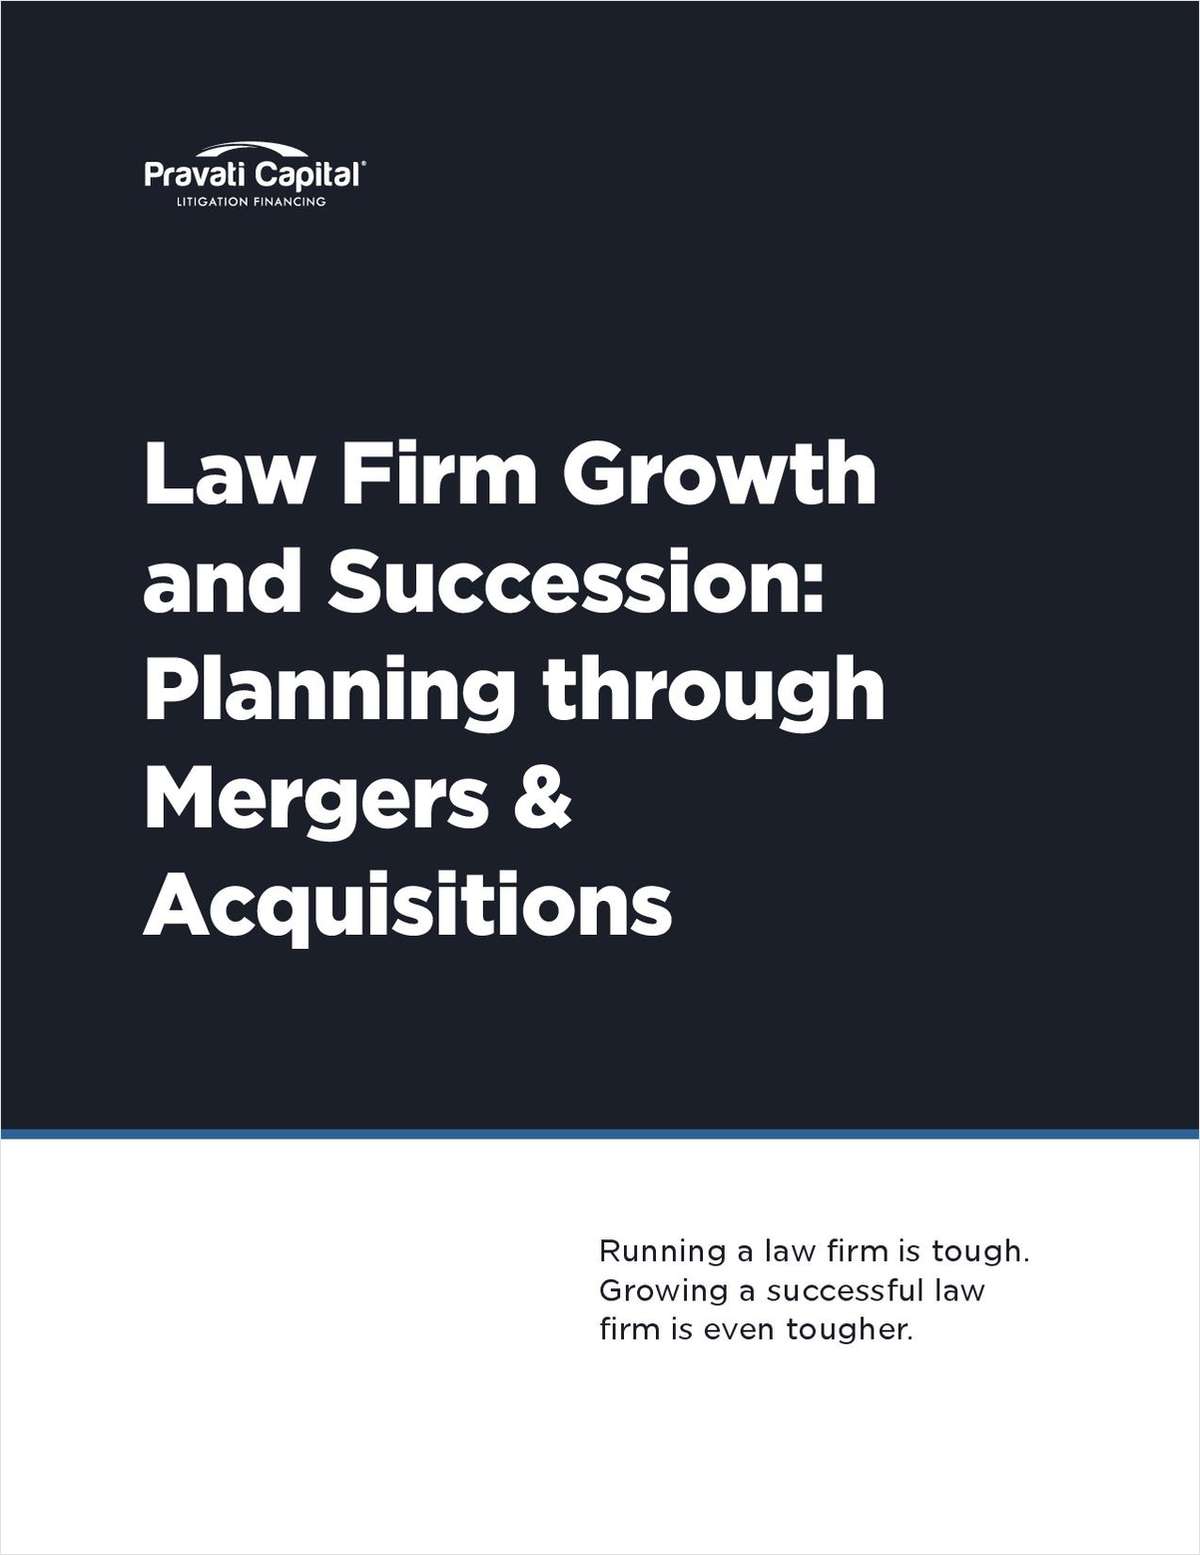 M&A can be a vital strategy for large and small firms that want to plan for growth and succession. Download this white paper to learn key elements of these strategies to consider for long-term growth and profitability, and how to make a merger profitable.